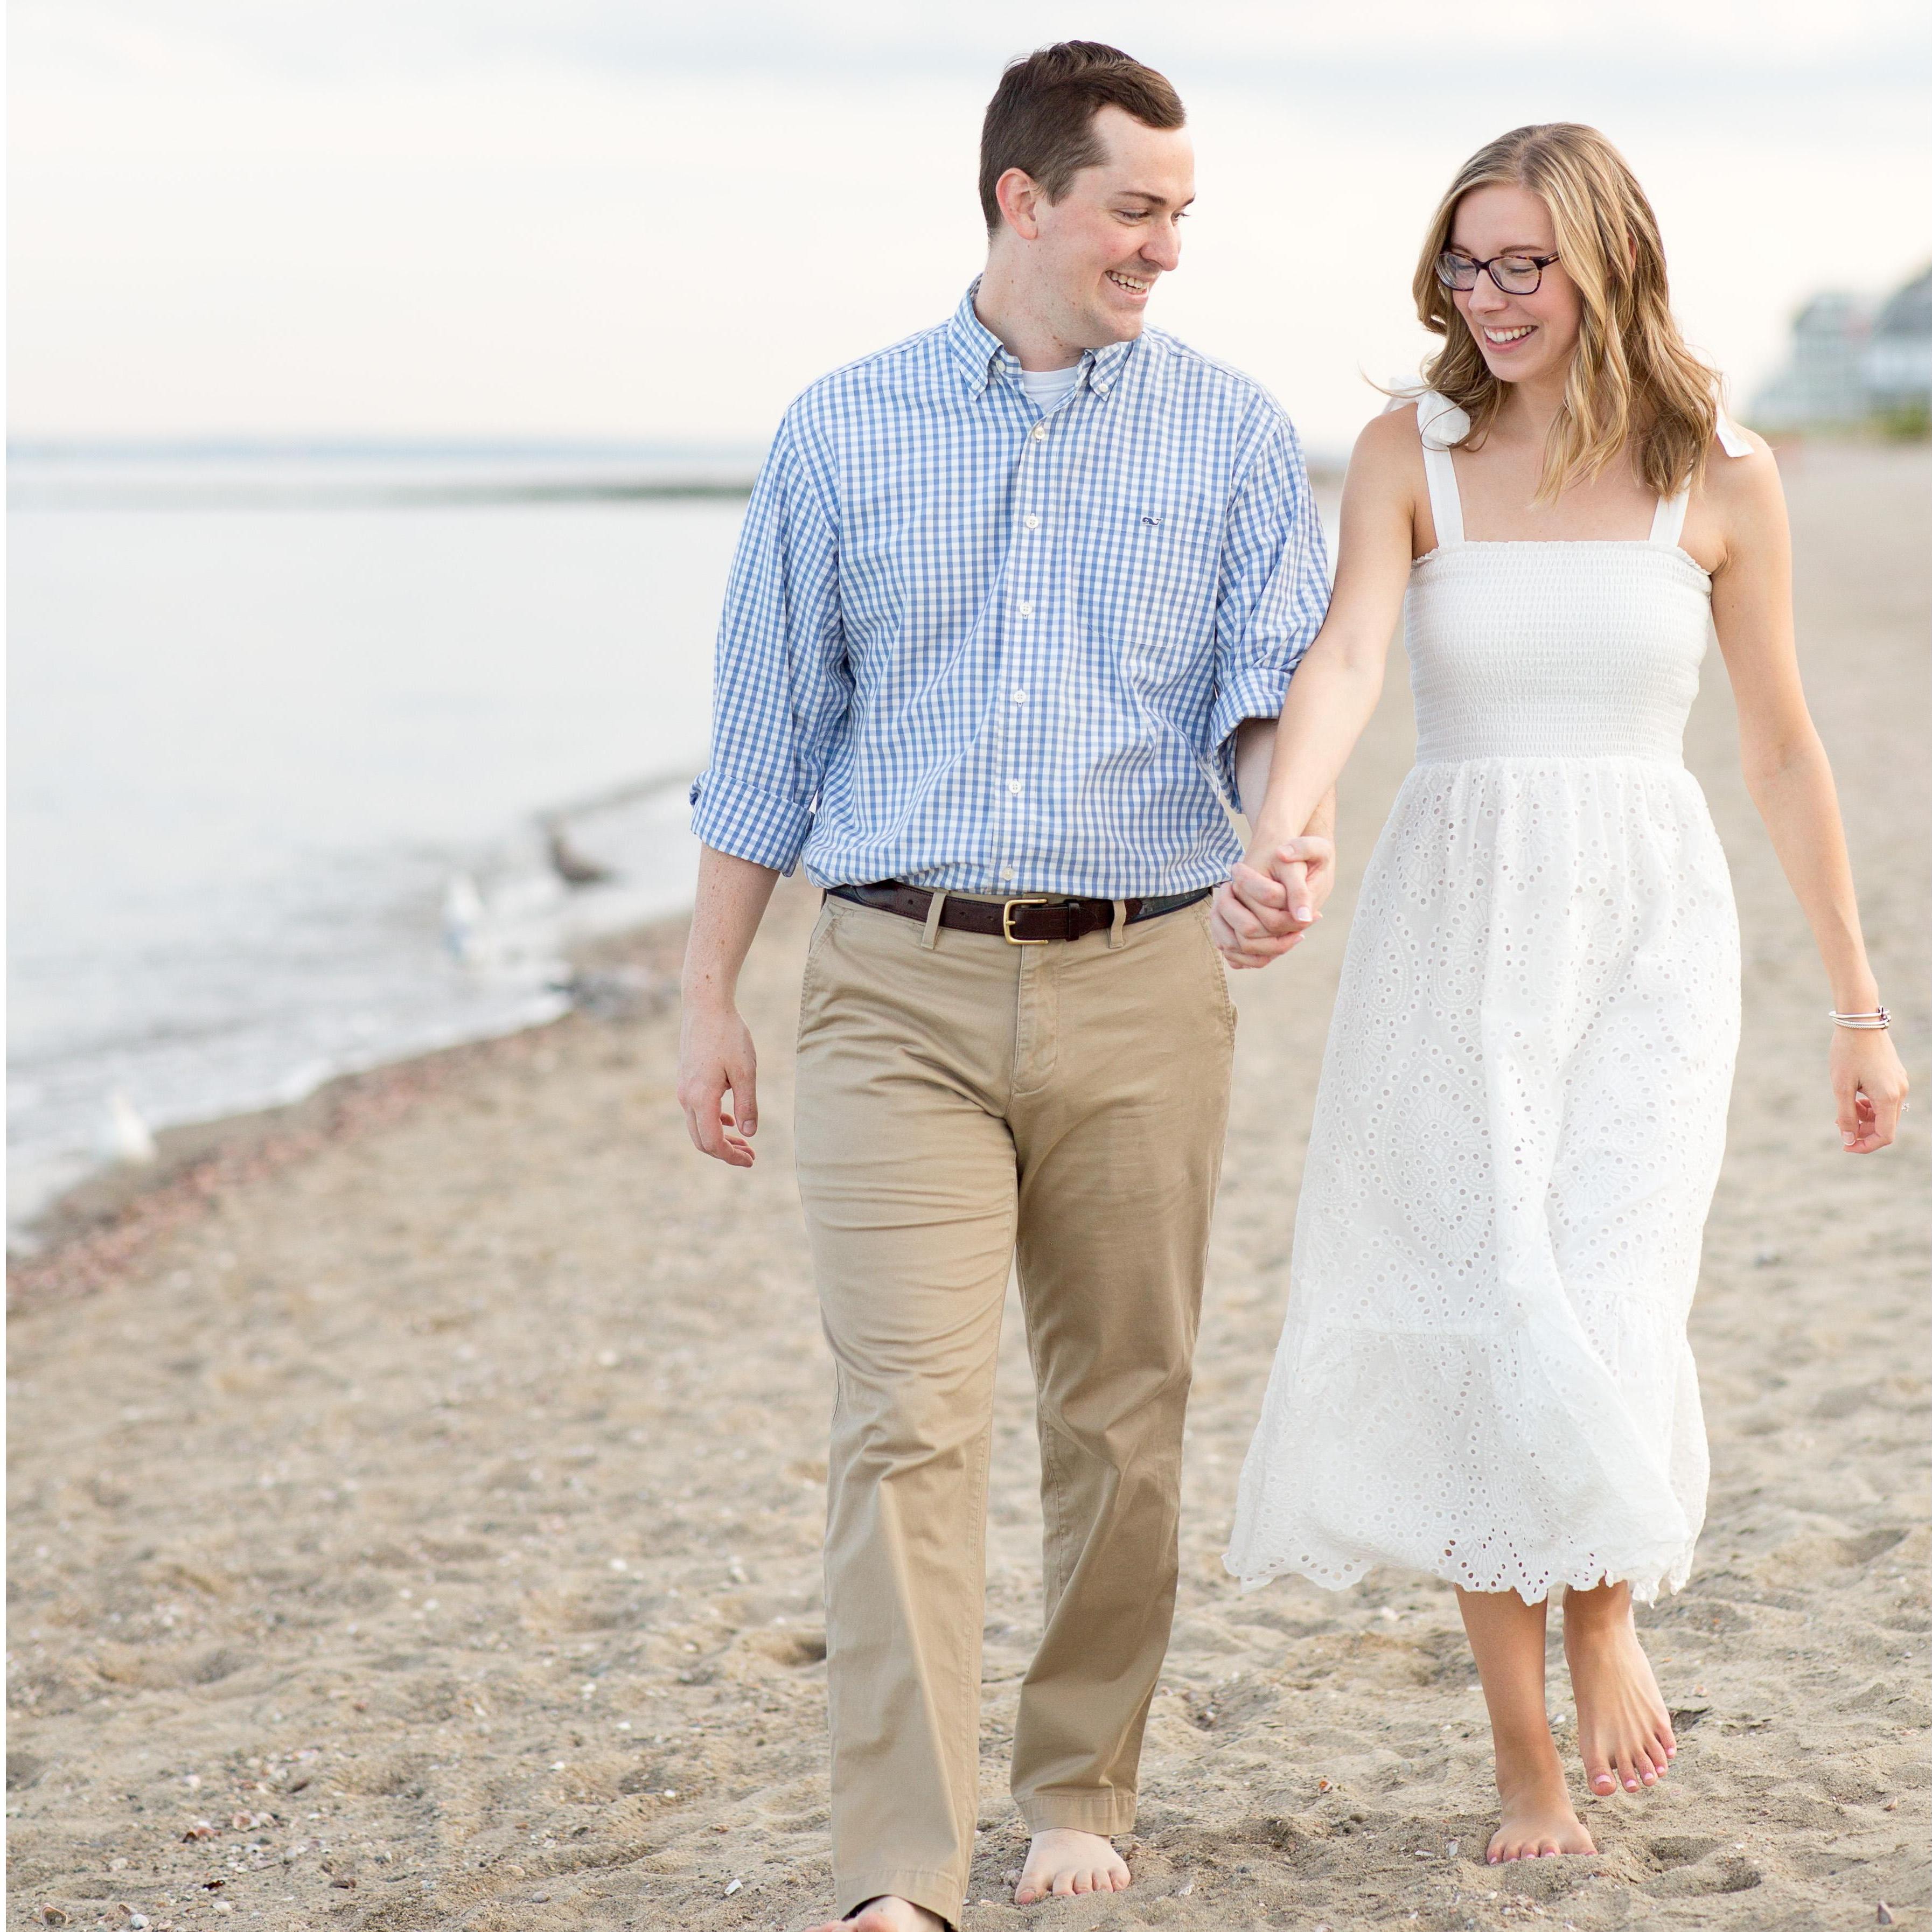 A photo from our engagement shoot at Penfield Beach in Fairfield, CT